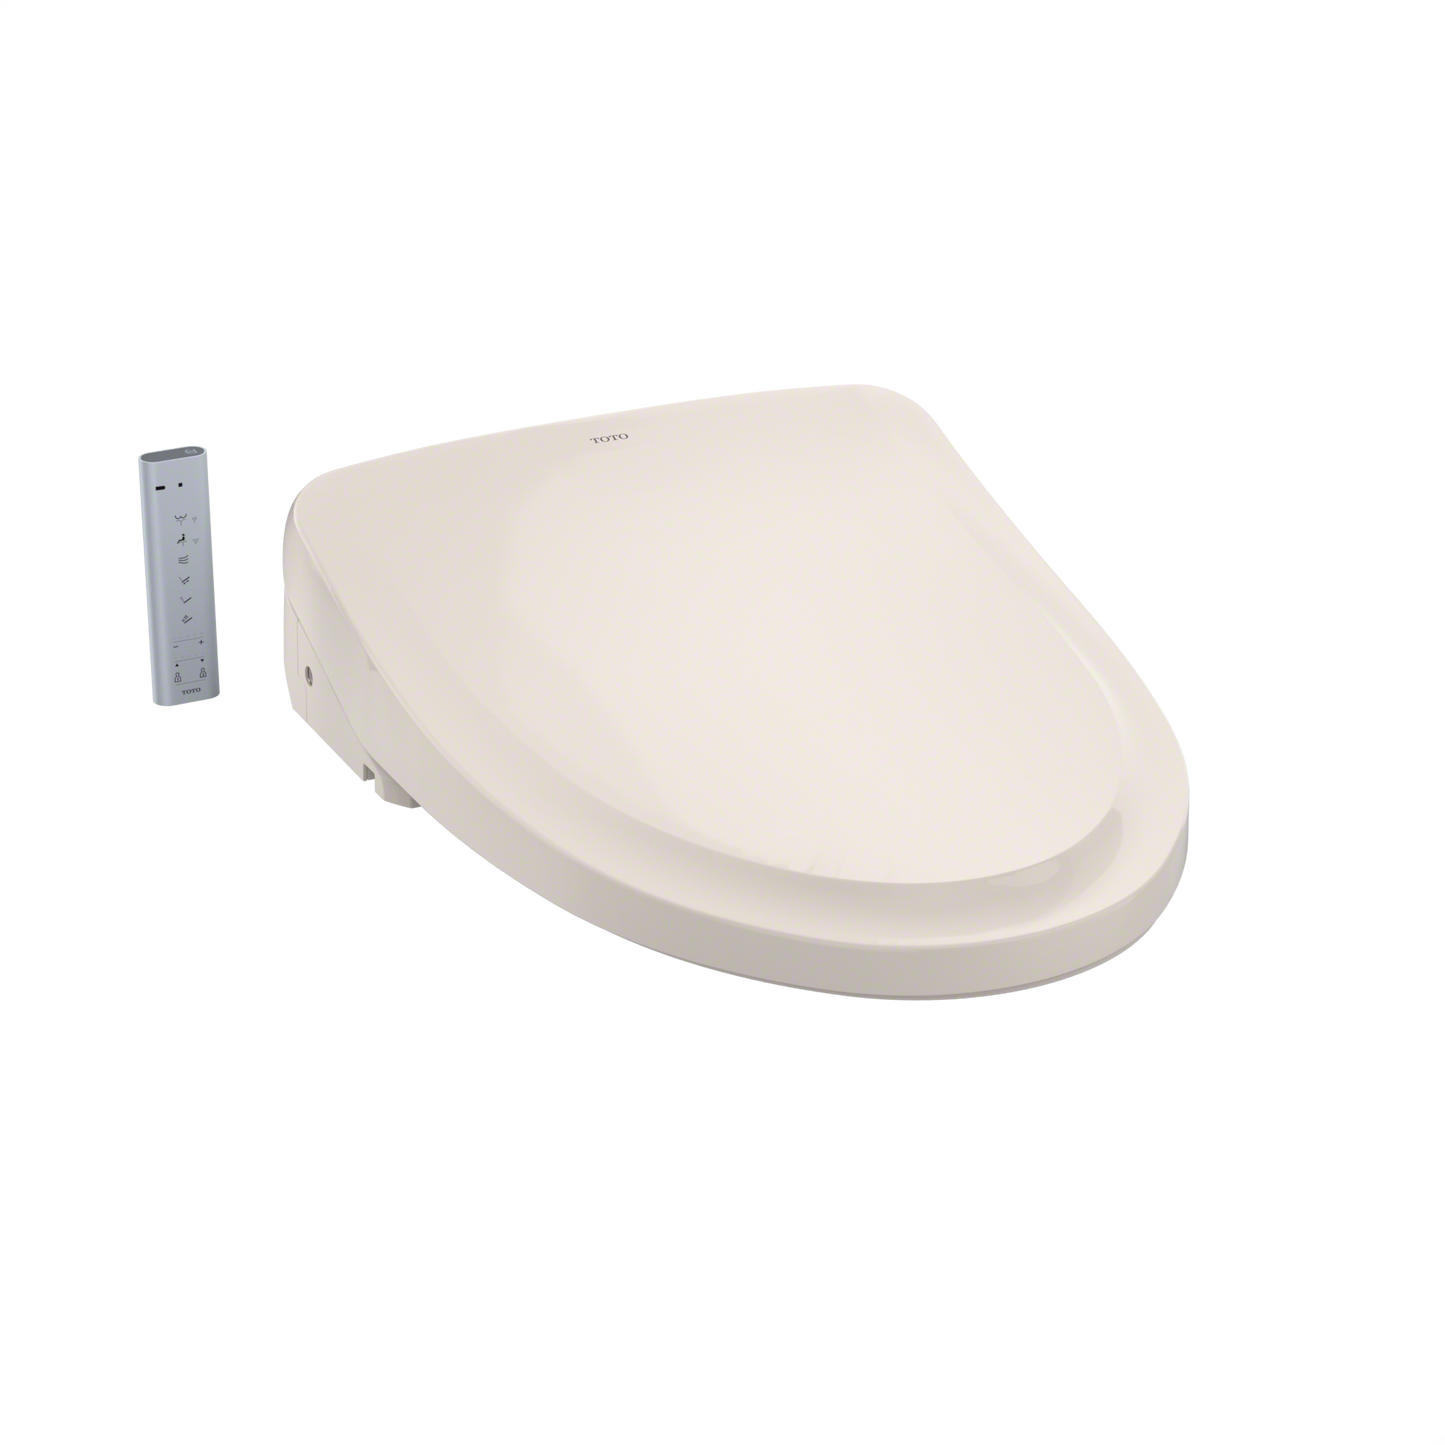 Toto SW3054#12 - Washlet S550E Elongated Bidet Seat with Remote and Dual Action Spray- Sedona Beige